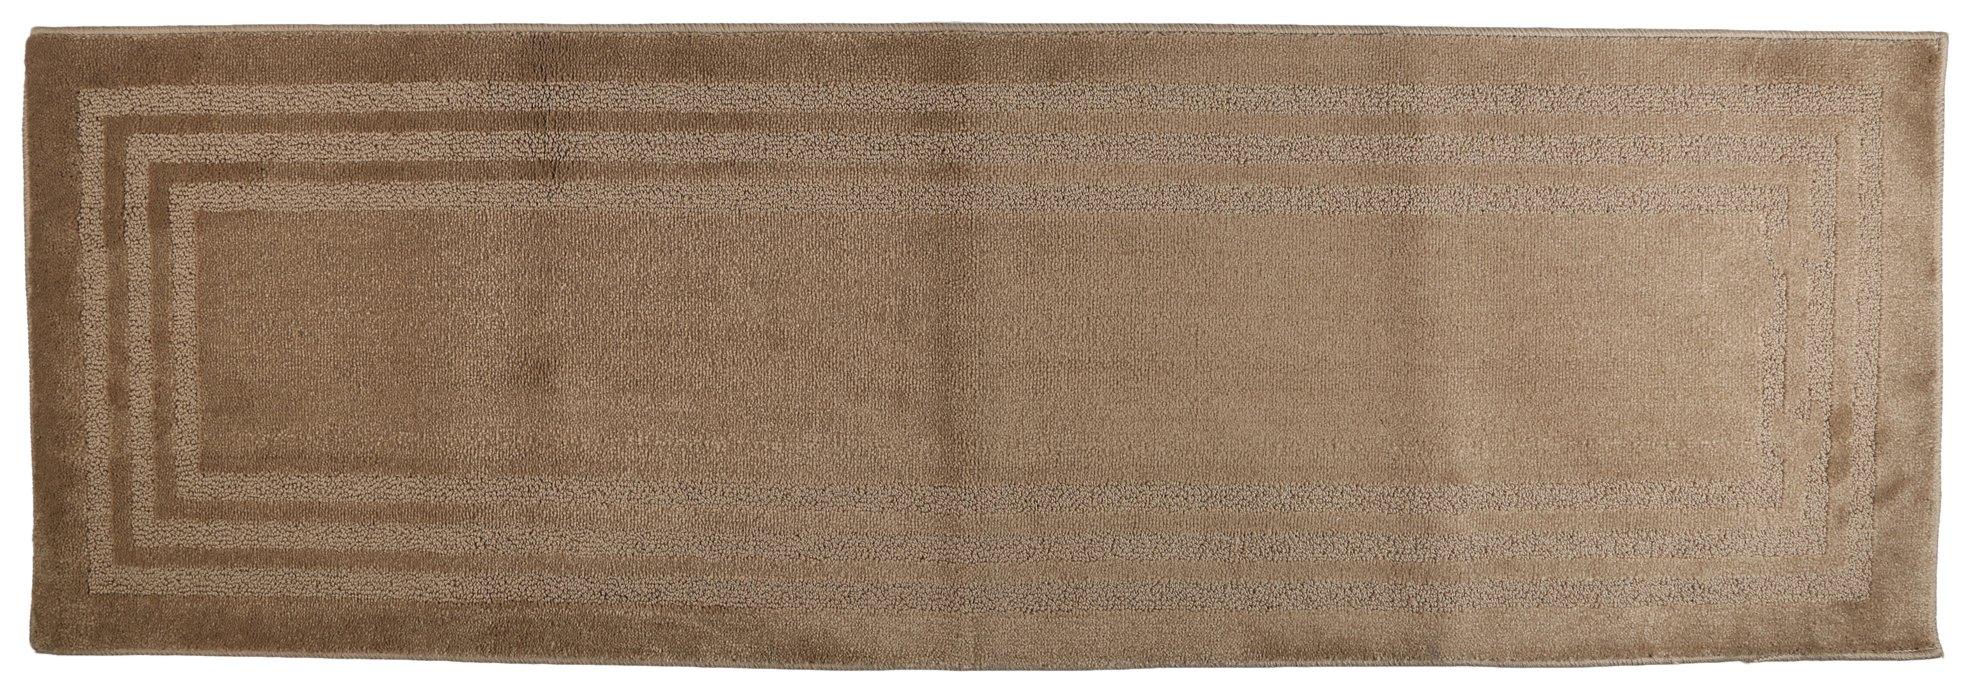 20x60 Textured Tufted Accent Rug